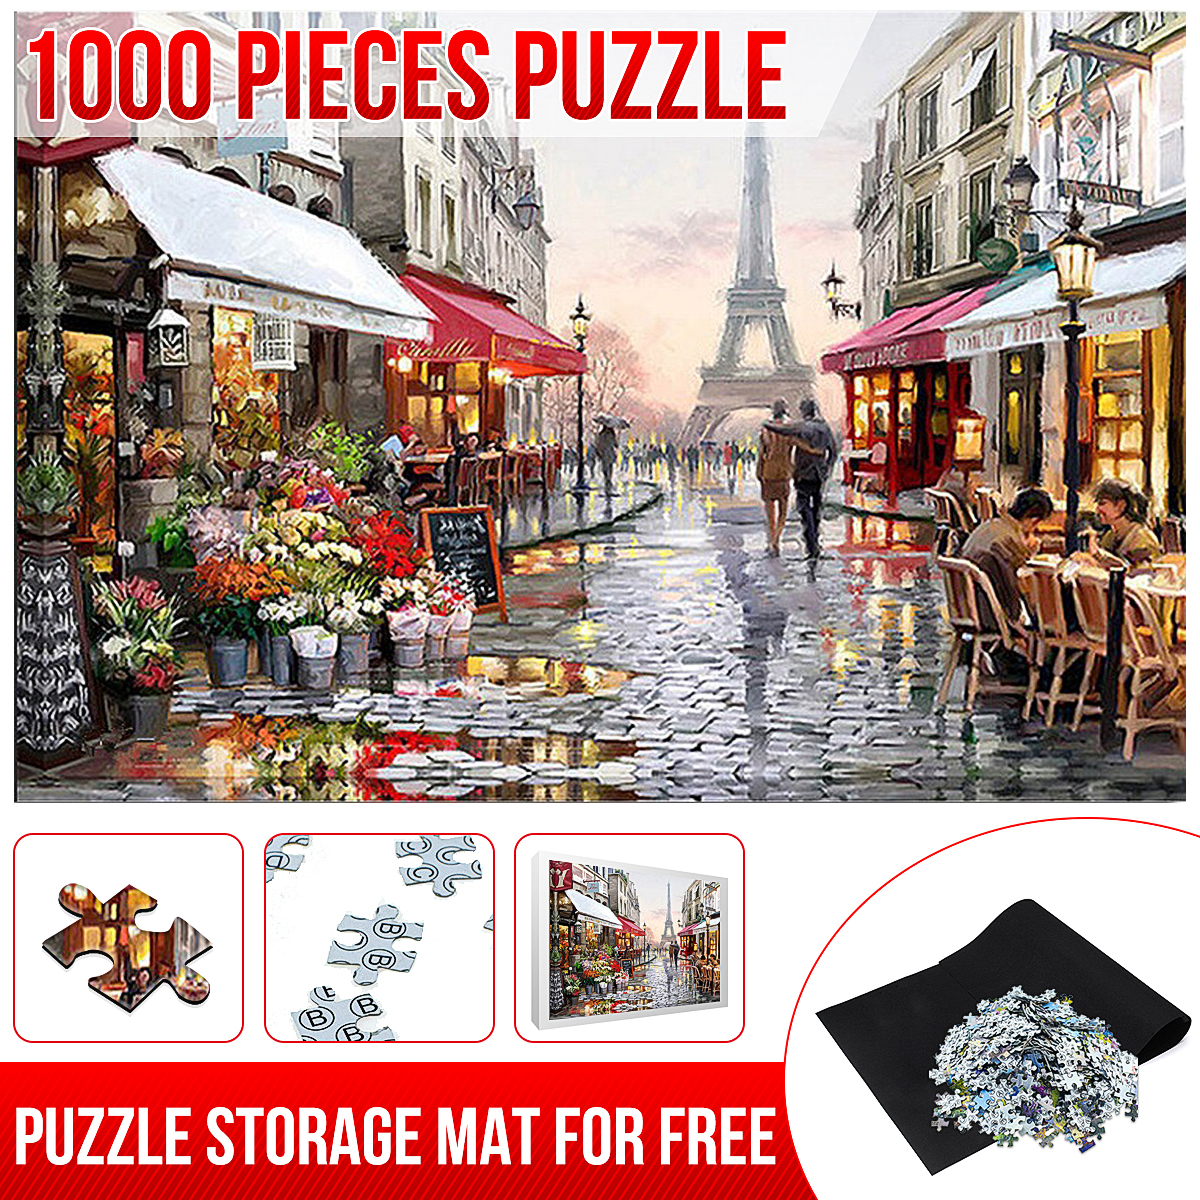 1000-Pieces-Jigsaw-Puzzle-Toy-DIY-Assembly-Paper-Puzzle-Beautiful-Building-Landscape-Educational-Toy-1685521-4